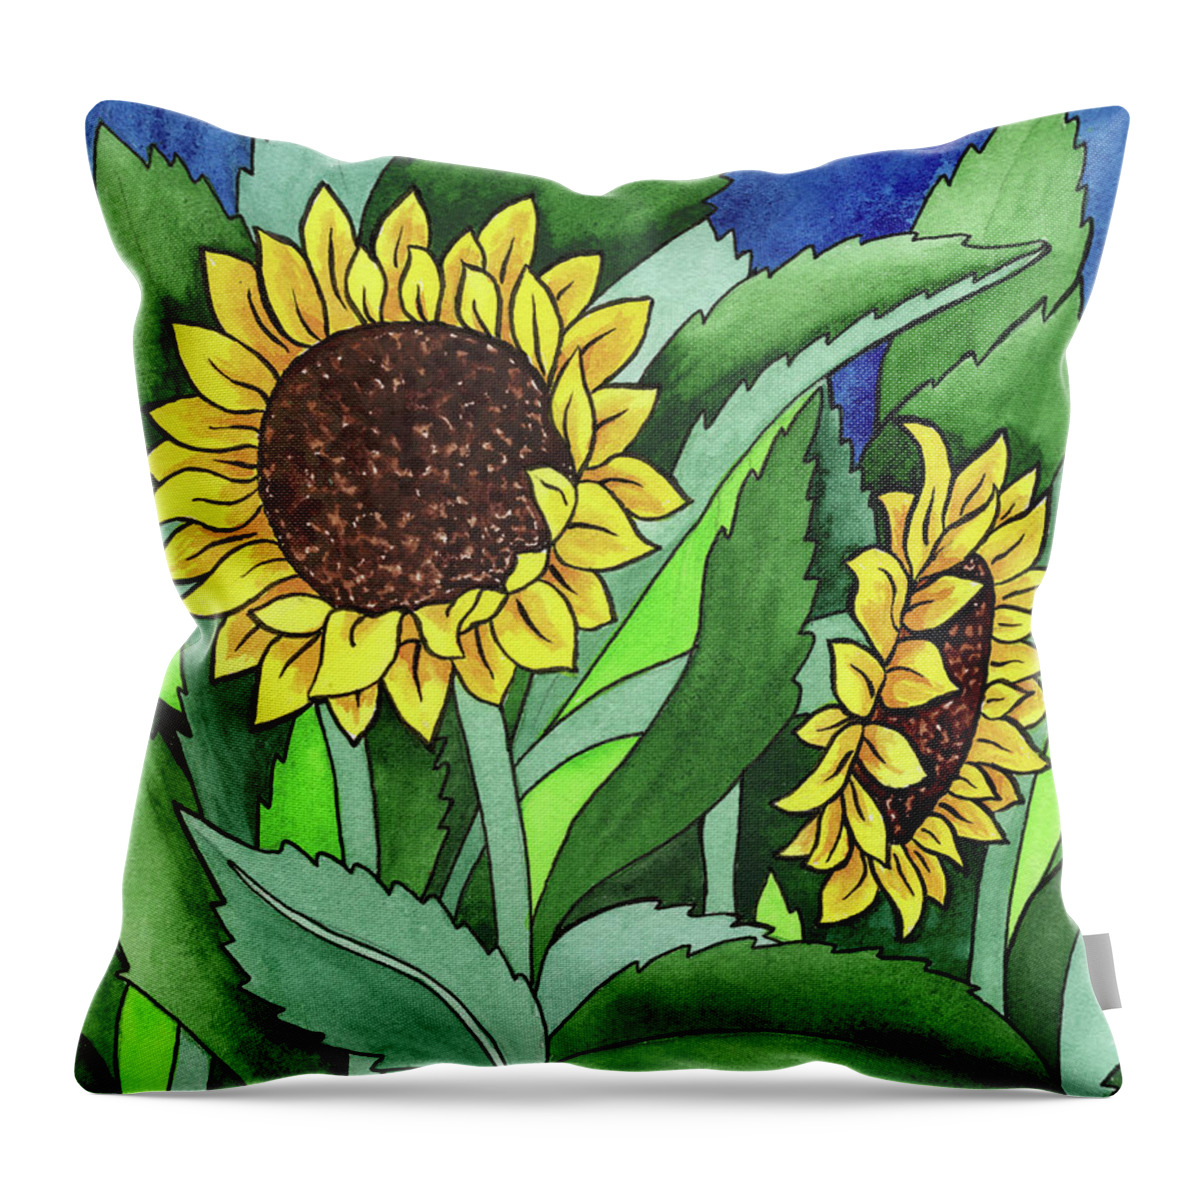 Sunflowers Throw Pillow featuring the painting Two Happy Sunflowers Flowers In Batik Watercolor Style by Irina Sztukowski